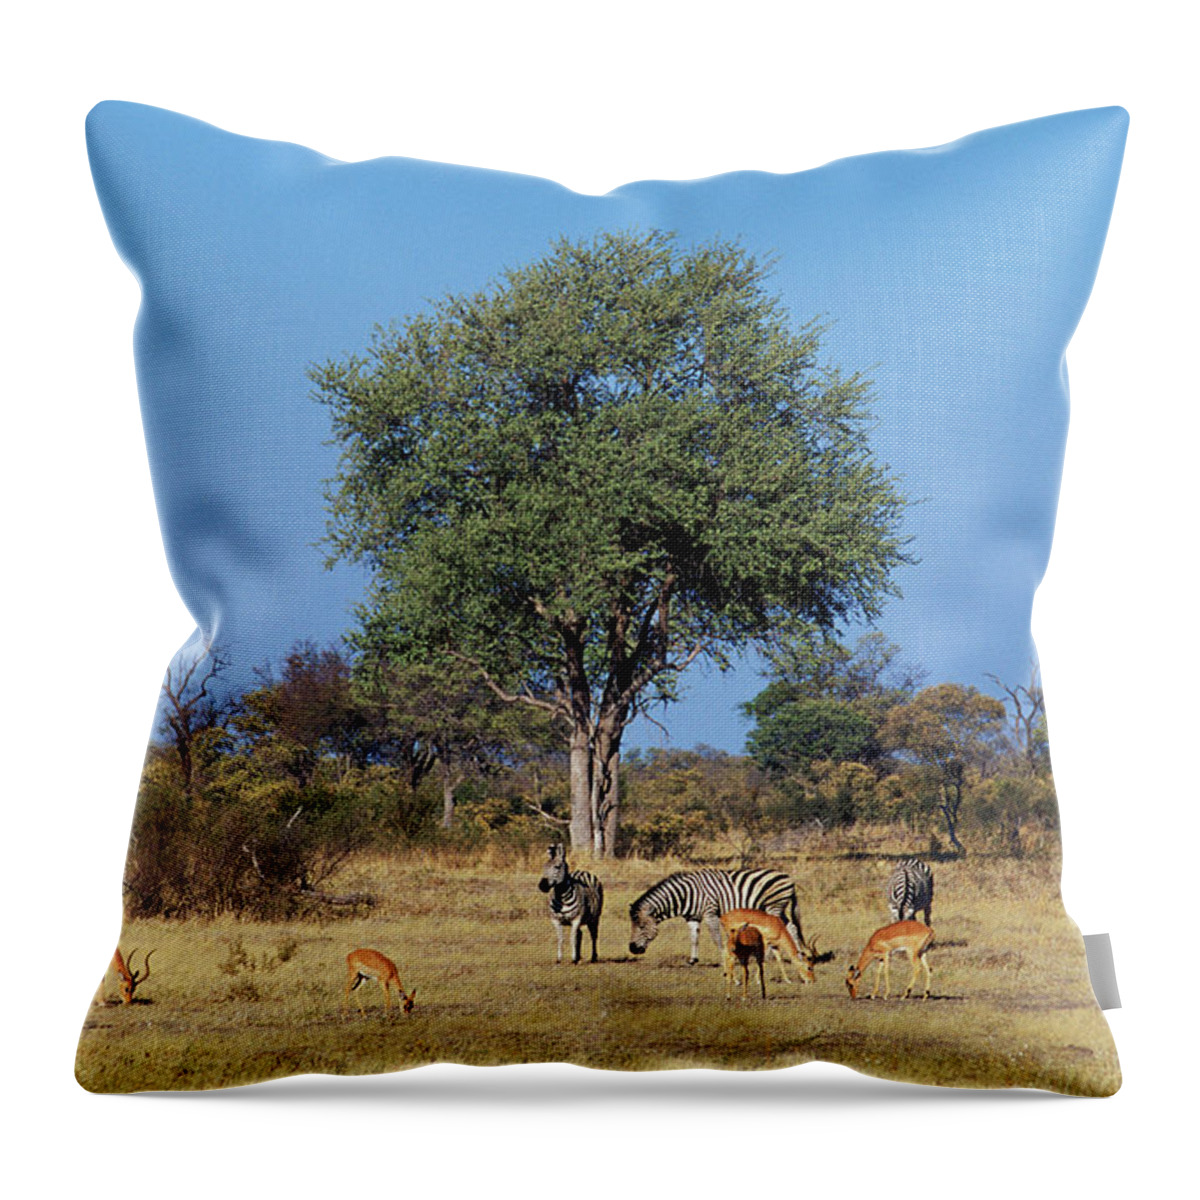 Horse Throw Pillow featuring the photograph Burchells Zebra And Impala, Moremi by Tim Graham